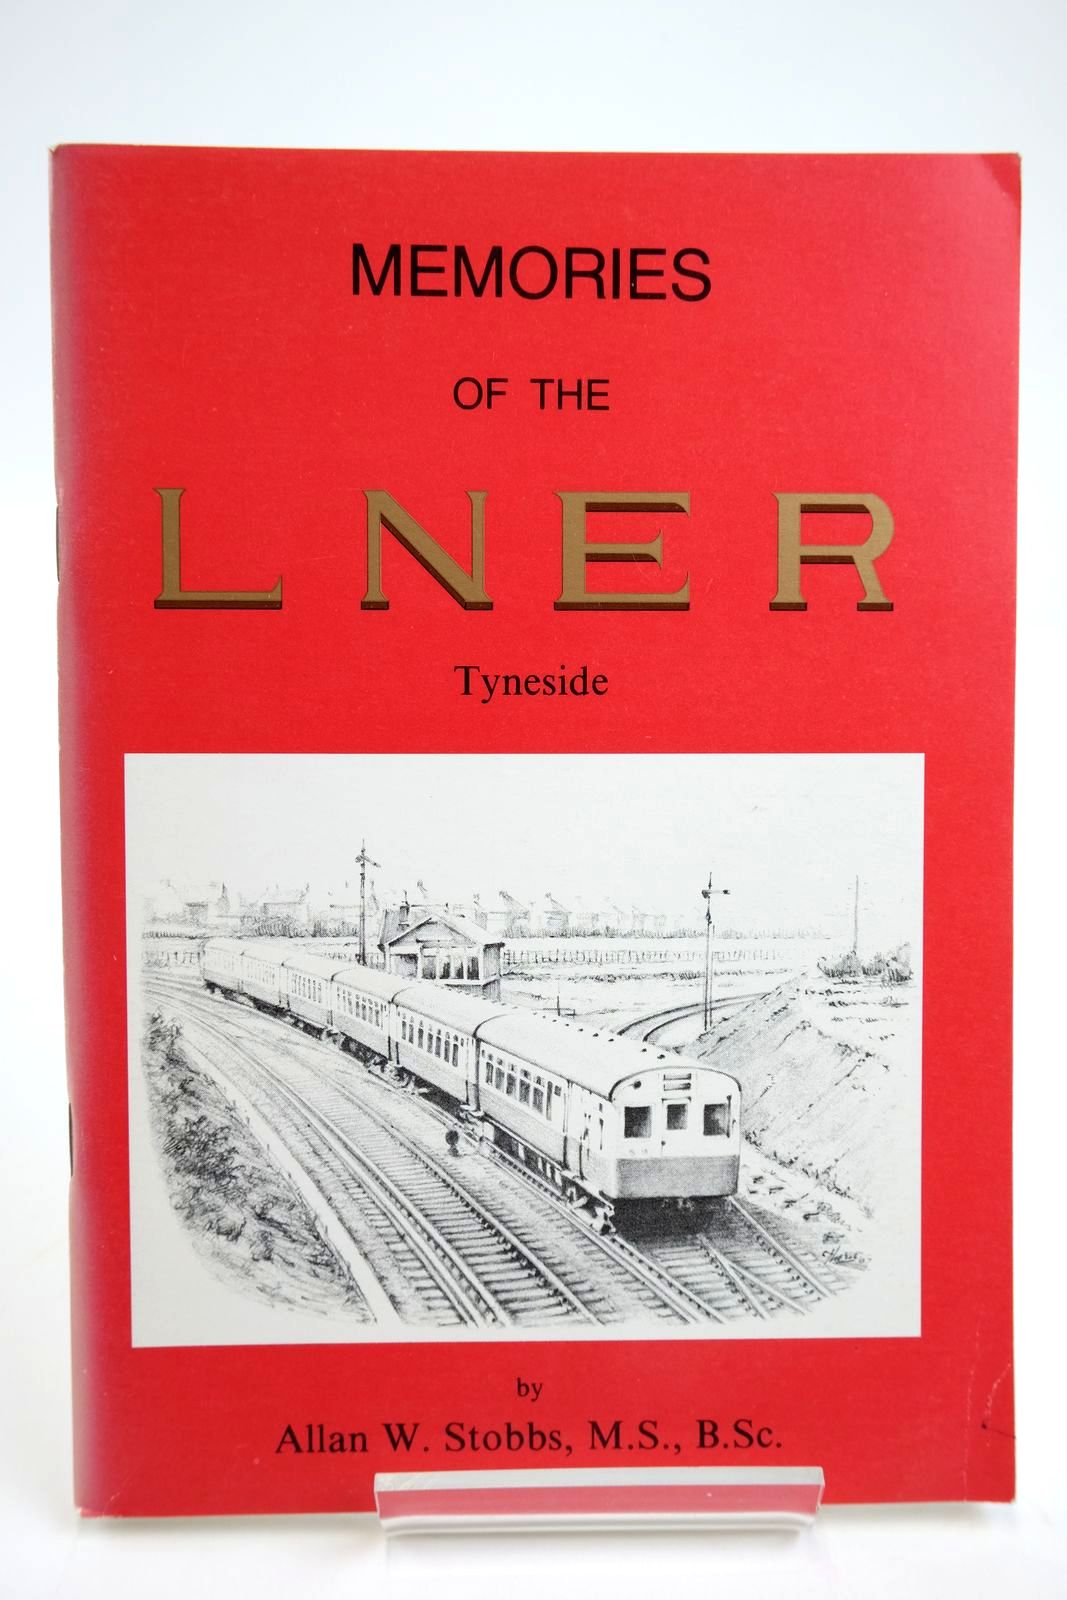 Photo of MEMORIES OF THE L.N.E.R. TYNESIDE written by Stobbs, Allan W. published by Allan W. Stobbs (STOCK CODE: 2133723)  for sale by Stella & Rose's Books